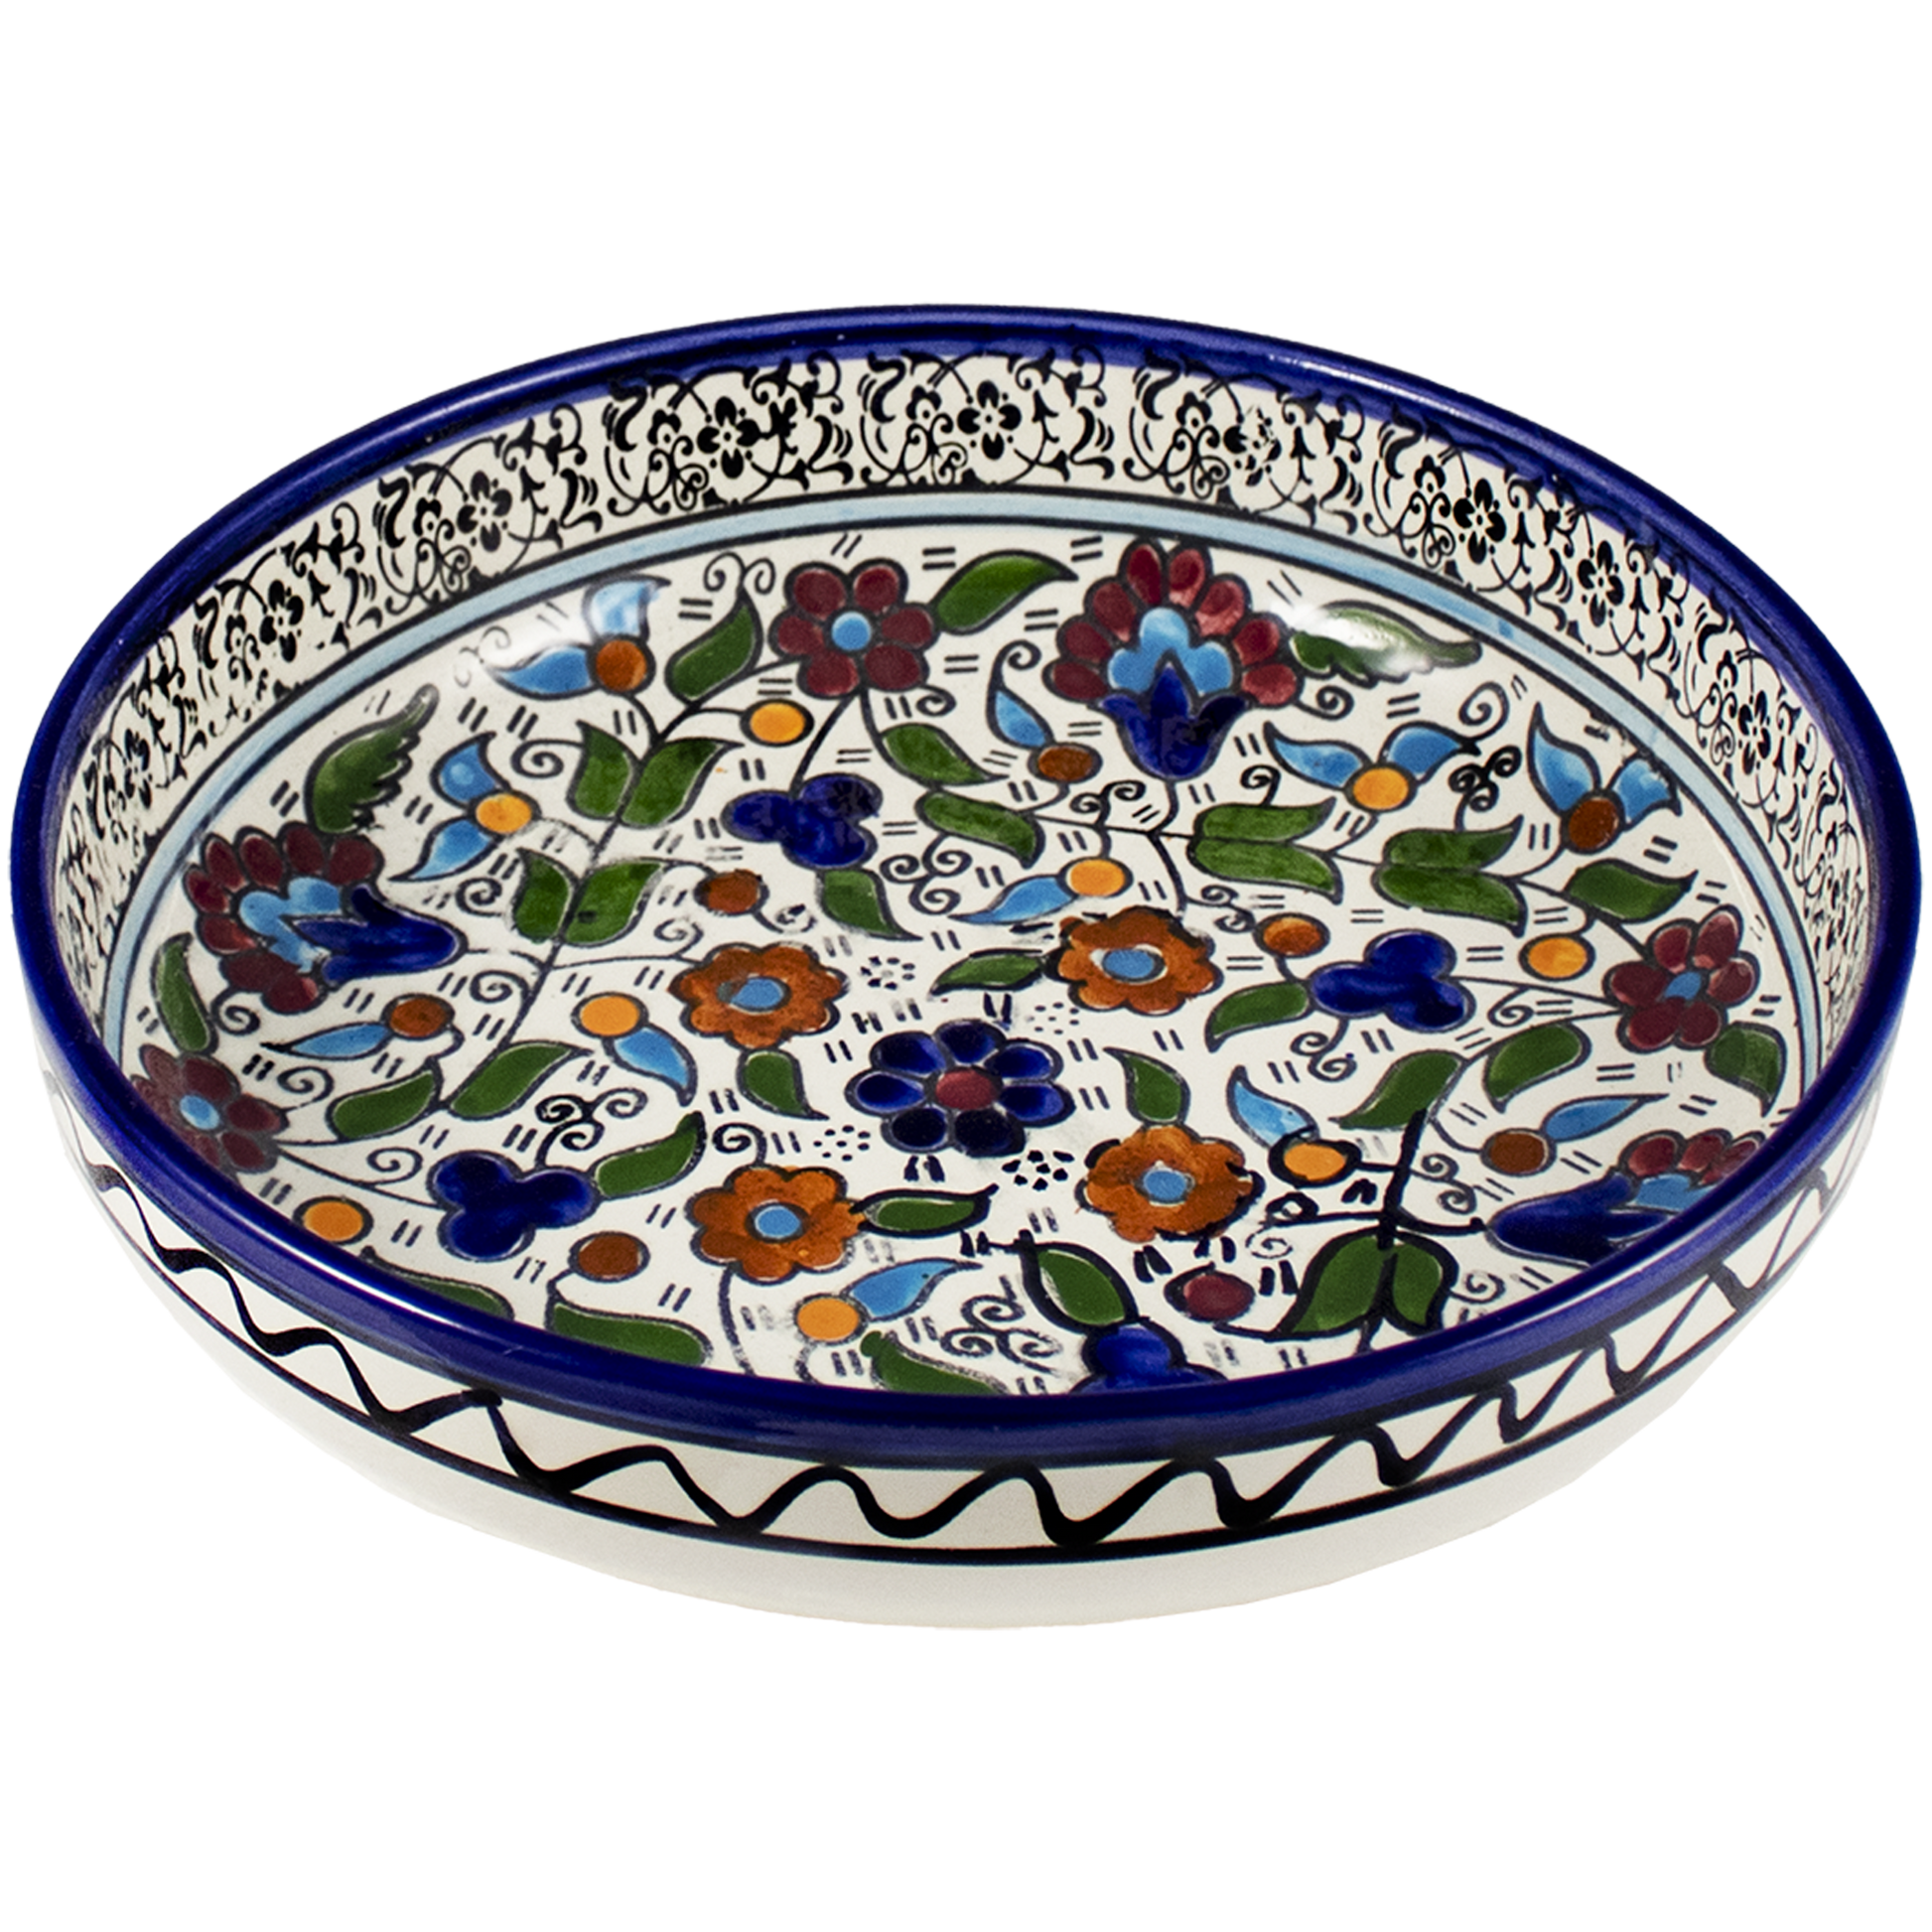 Large Armenian ceramic serving dish with floral pattern and blue rim